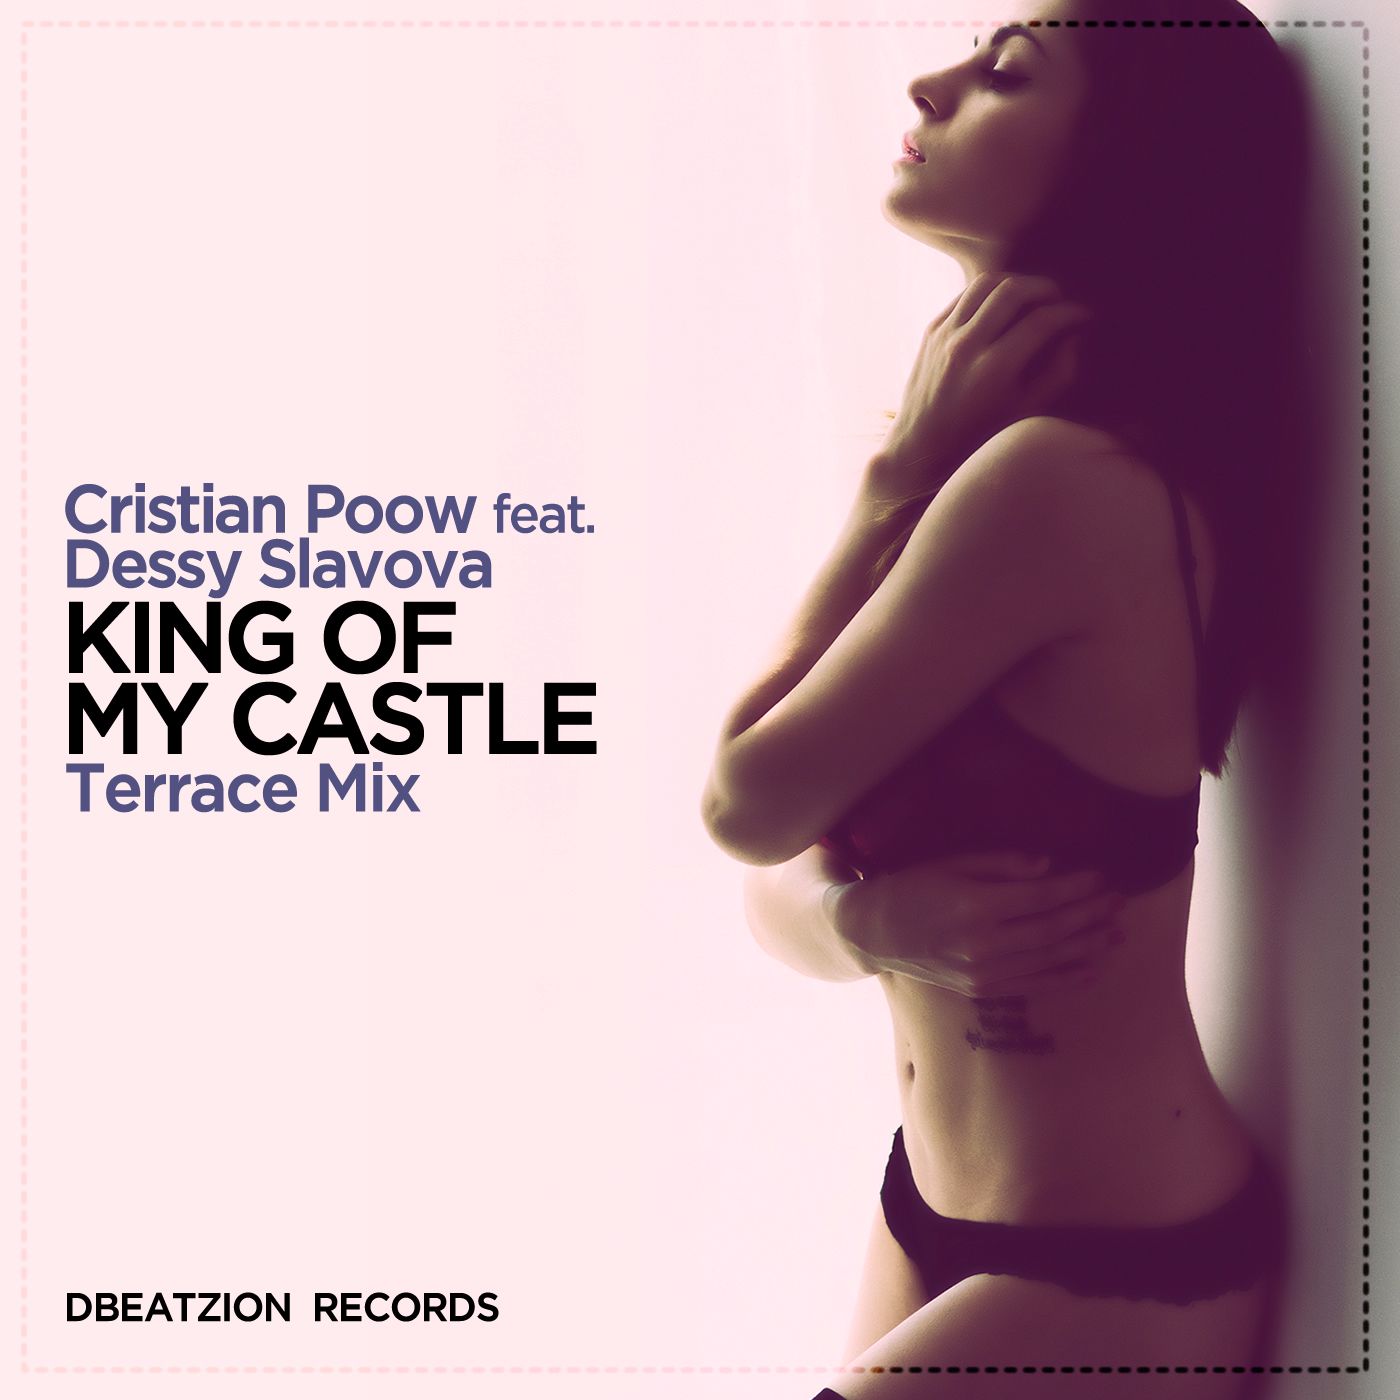 Cristian Poow feat. Dessy Slavova - King Of My Castle (Terrace Mix) [FREE DOWNLOAD NOW!]